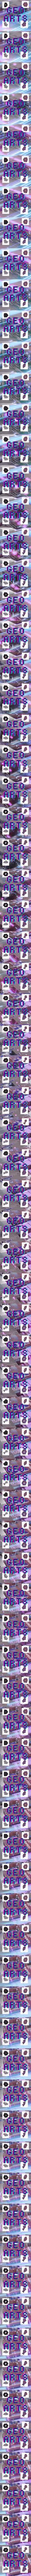 GeoArts collection image